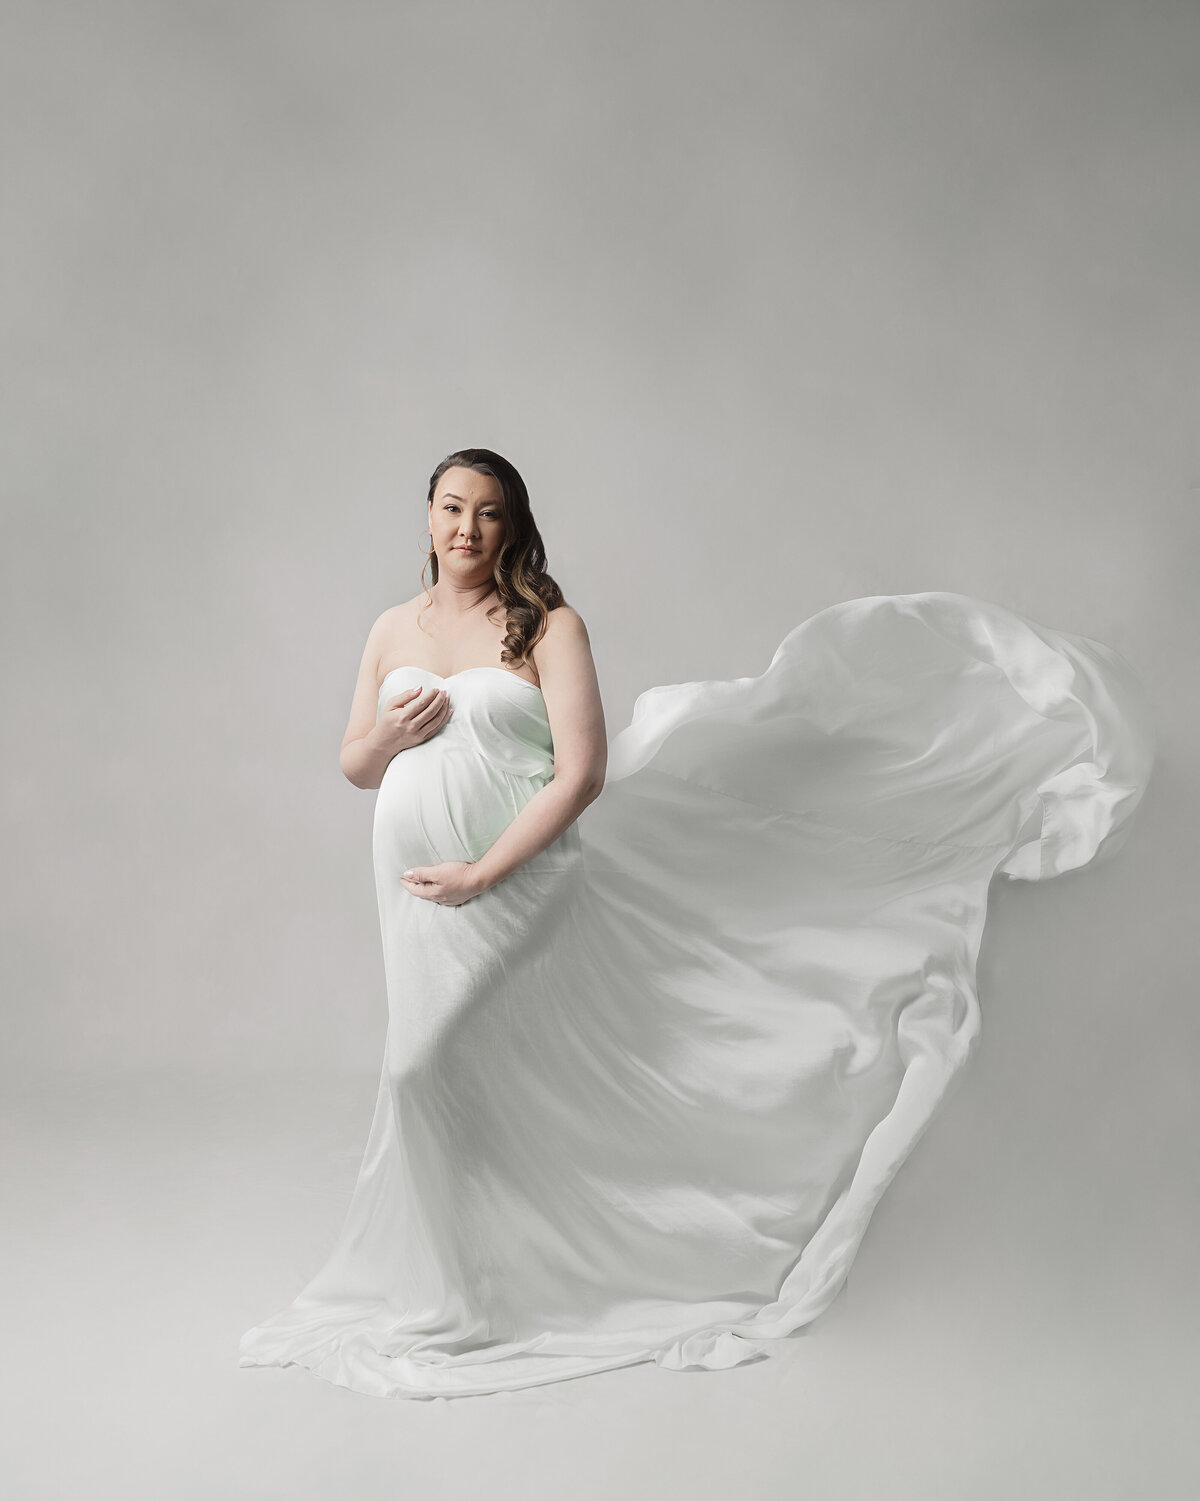 pregnant mother on white backdrop with flowing white dress looks into camera with slight smile